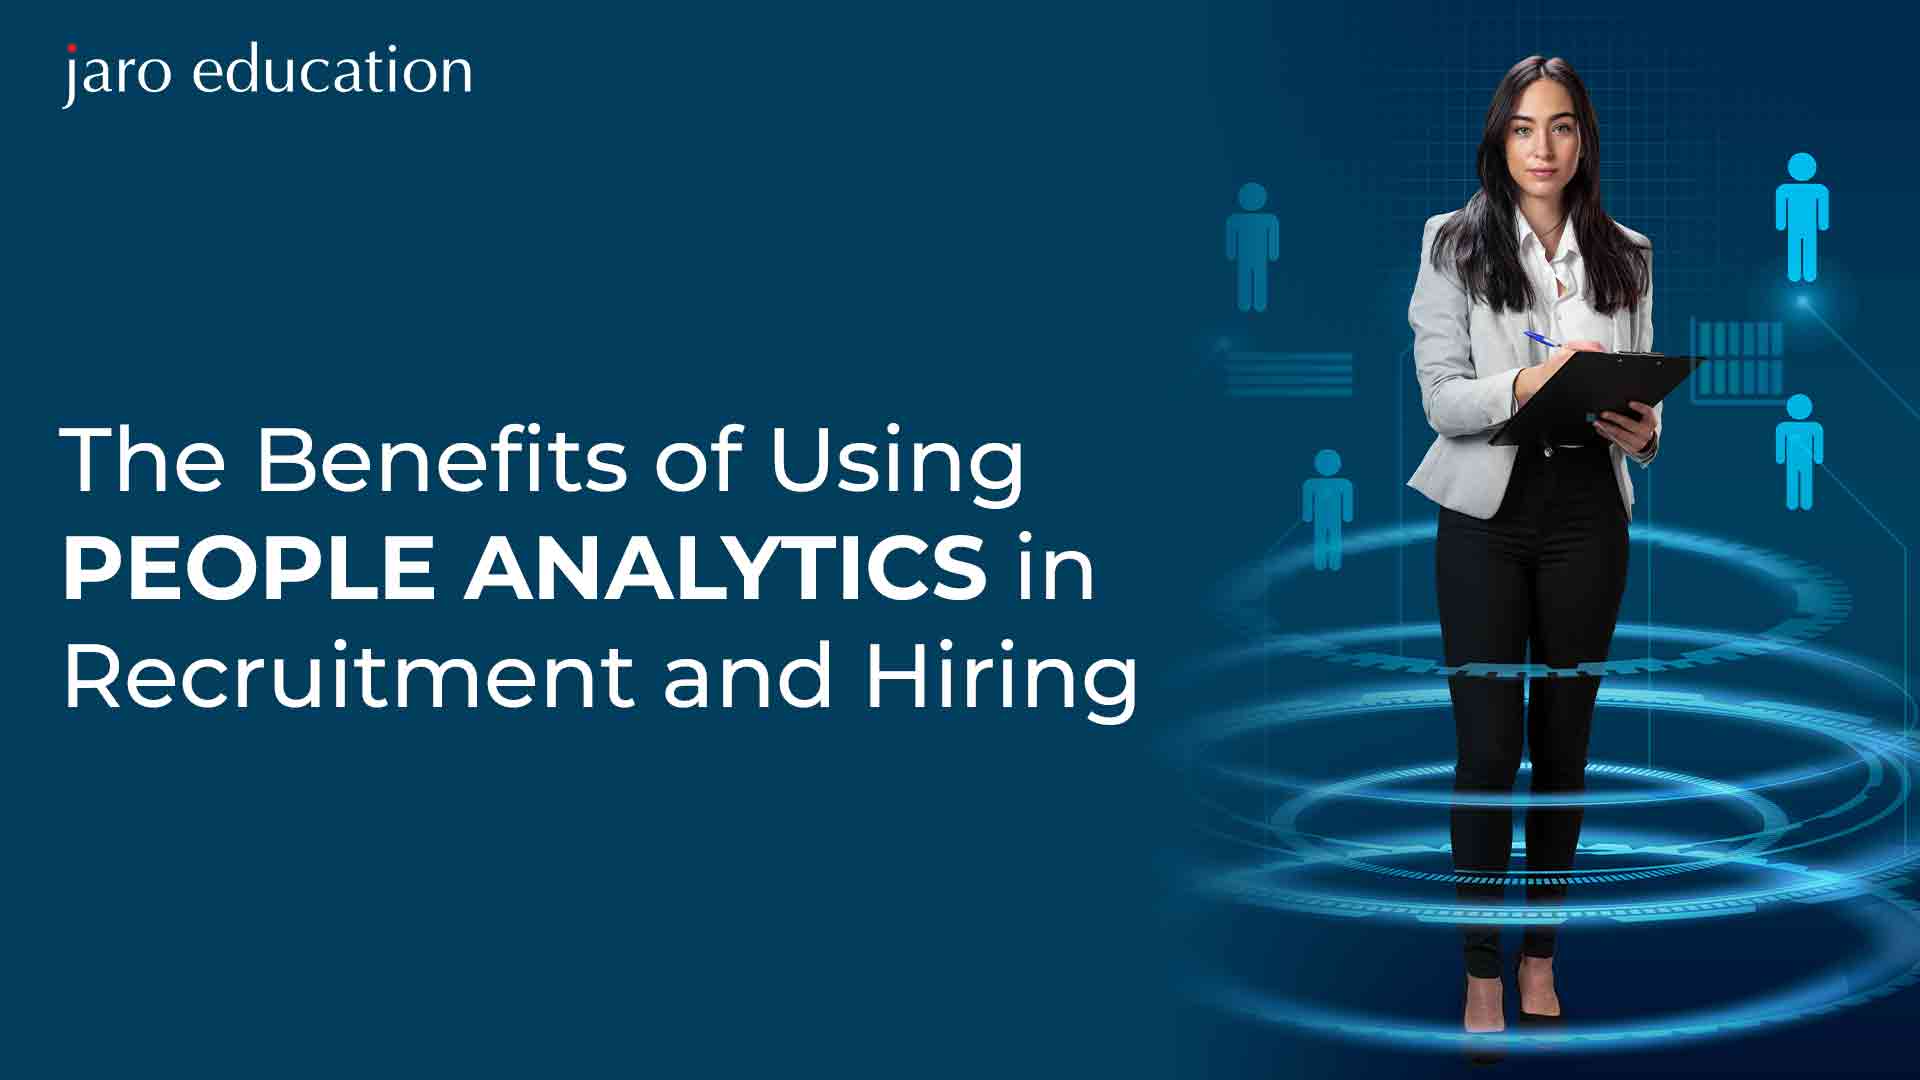 The Benefits of Using People Analytics in Recruitment and Hiring